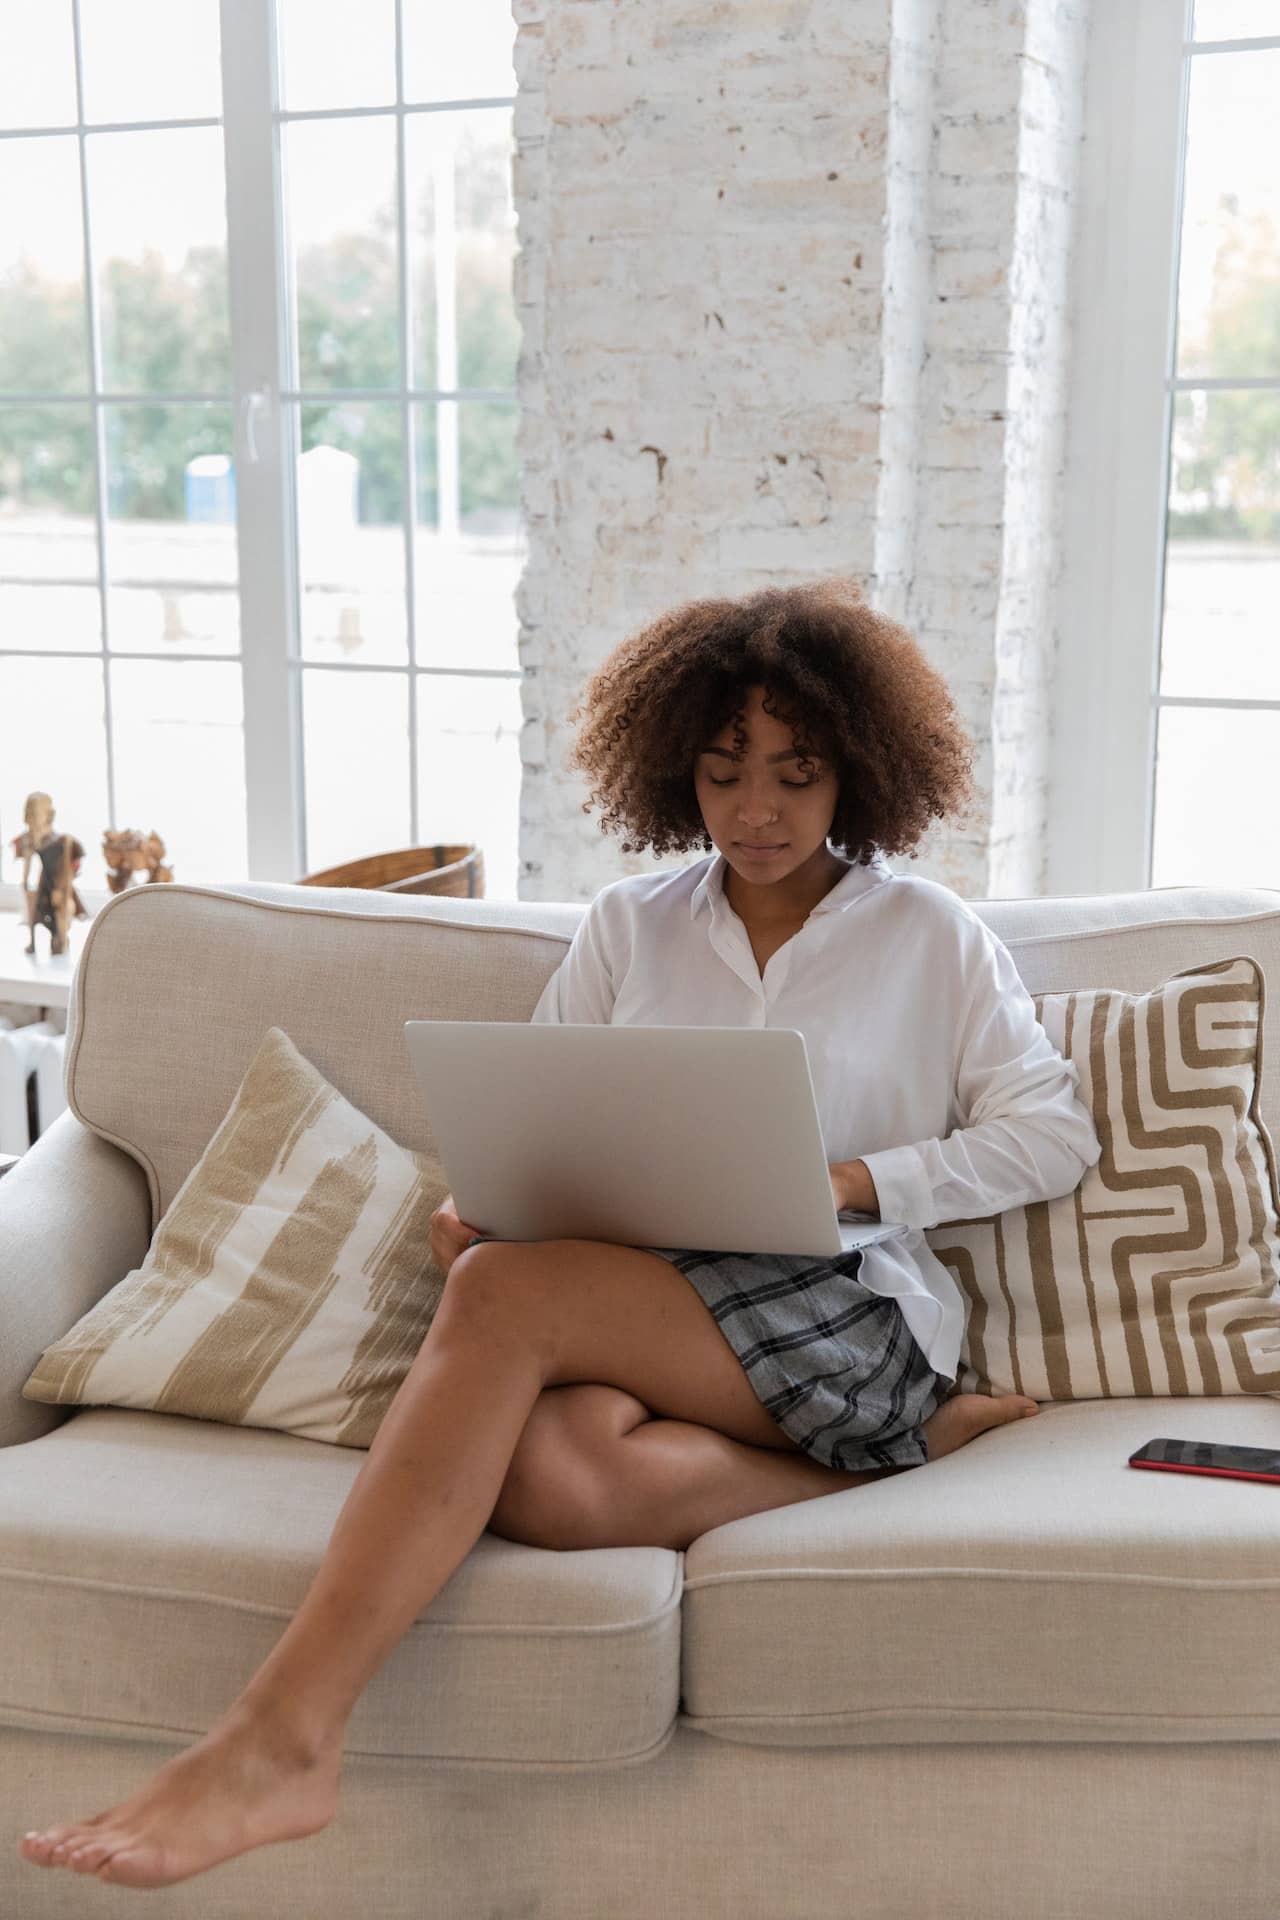 Black woman with chin length natural hair sits on her sofa in a white blouse and a casual skirt. She is working from home on her laptop.